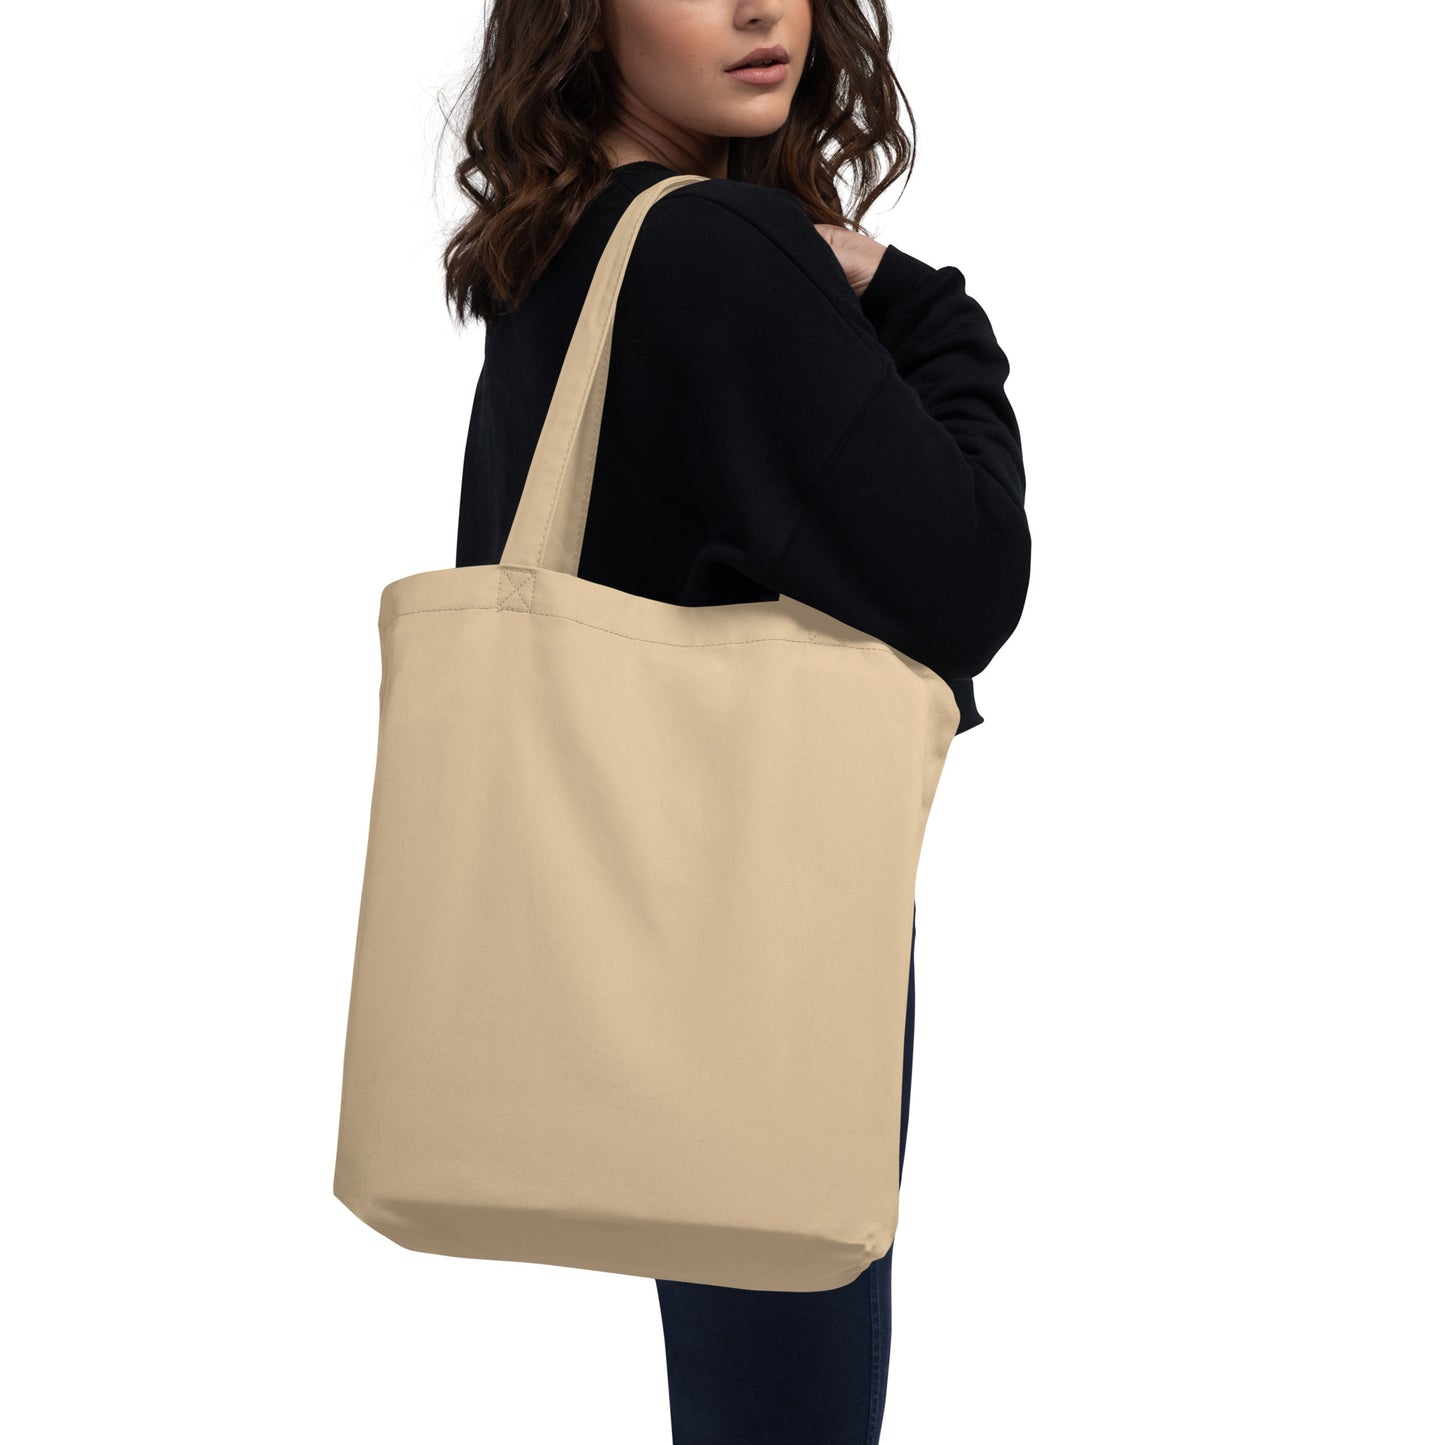 Merry and Bright Eco Tote Bag